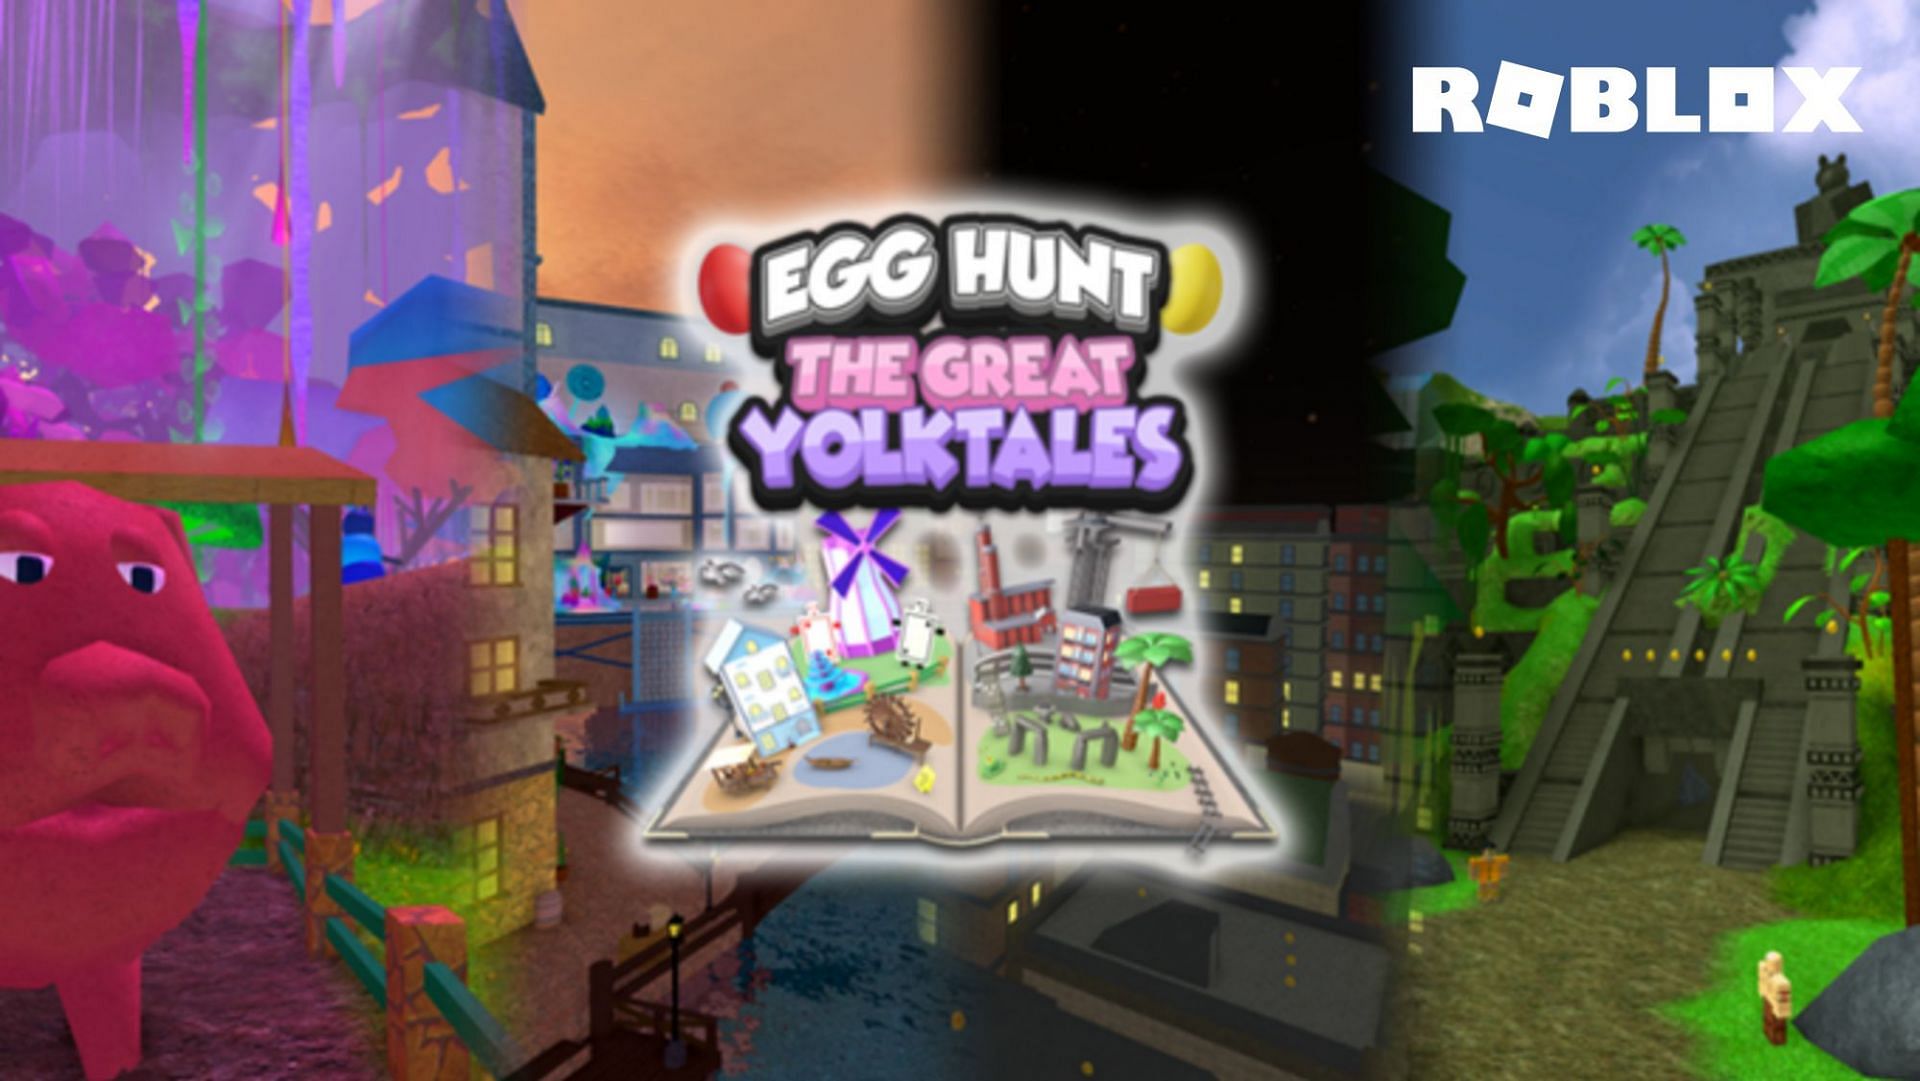 Roblox fans ask for the return of Egg Hunts back in the game